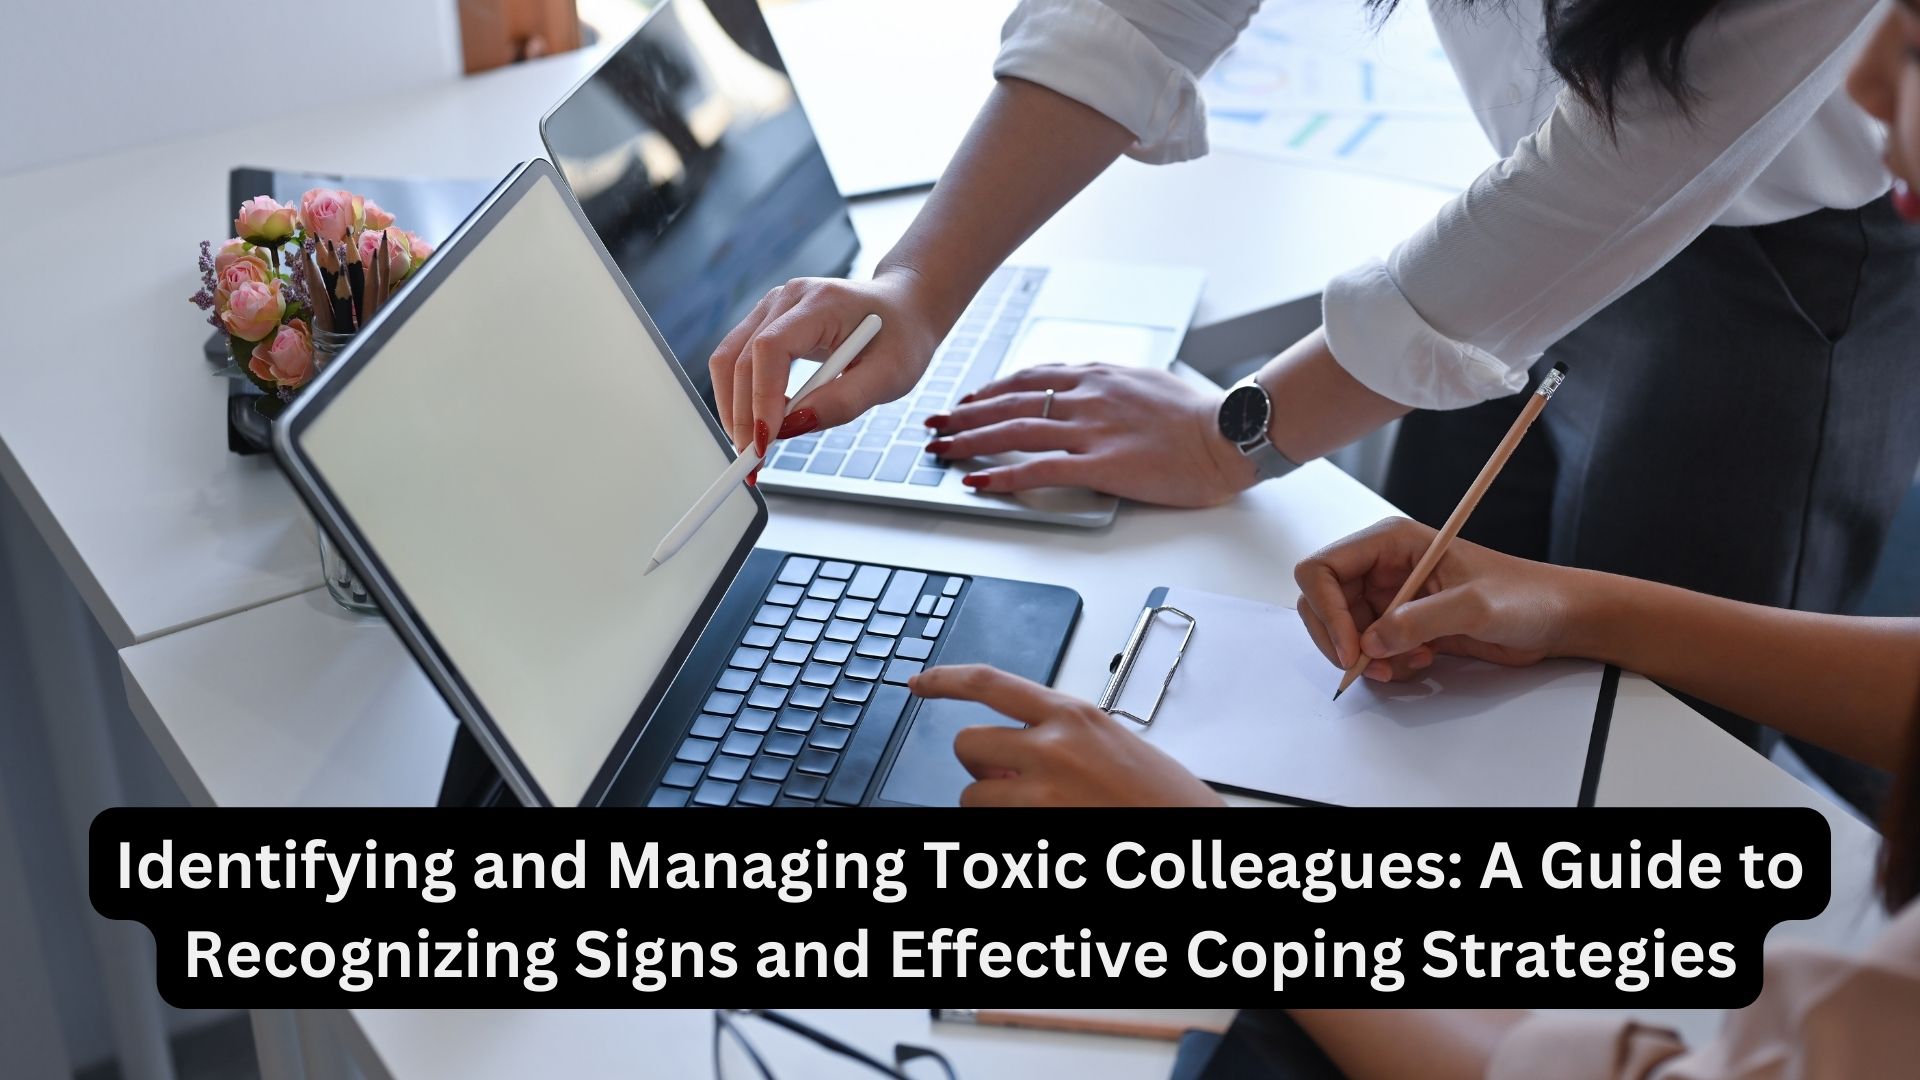 Identifying and Managing Toxic Colleagues: A Guide to Recognizing Signs and Effective Coping Strategies